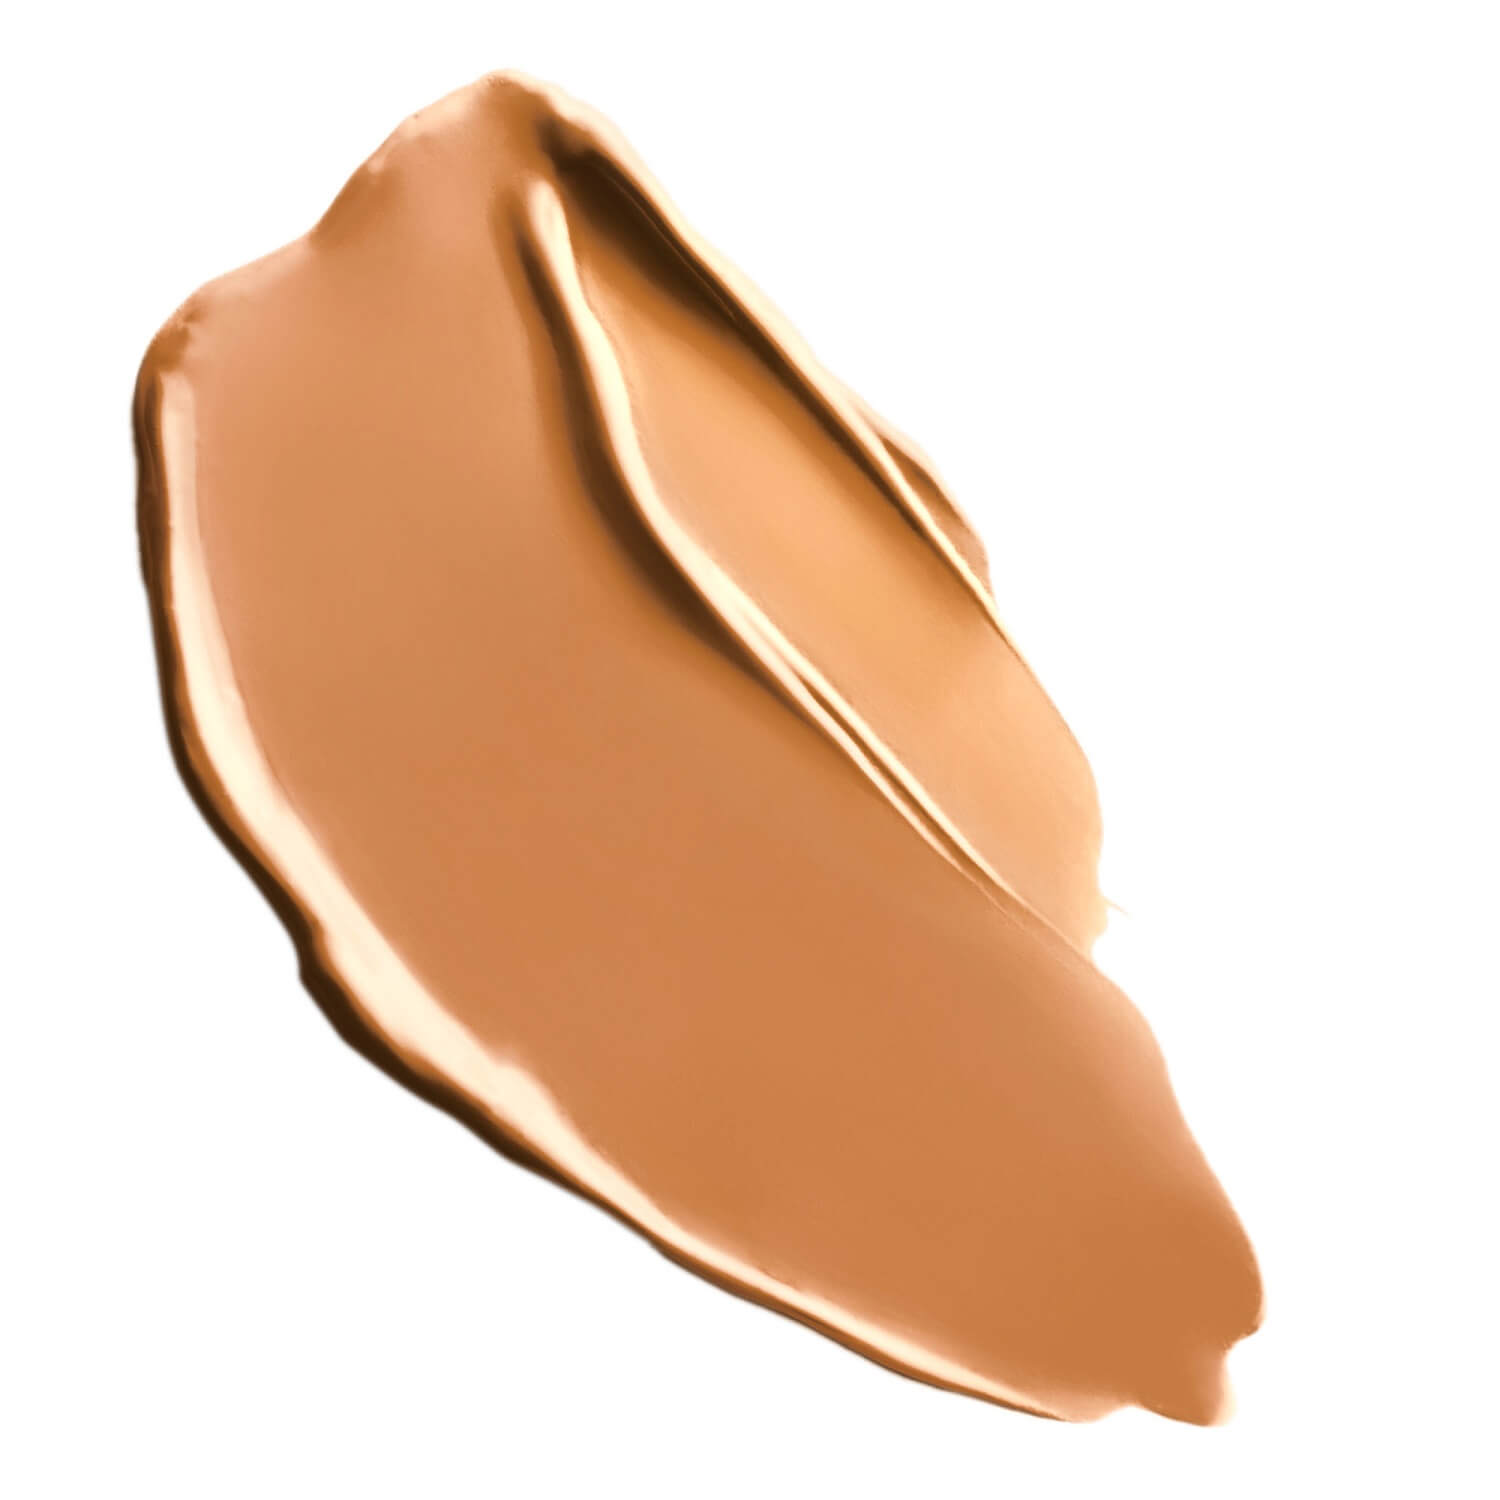 REAL FLAWLESS WEIGHTLESS PERFECTING CONCEALER (CORRECTOR DE IMPERFECCIONES)